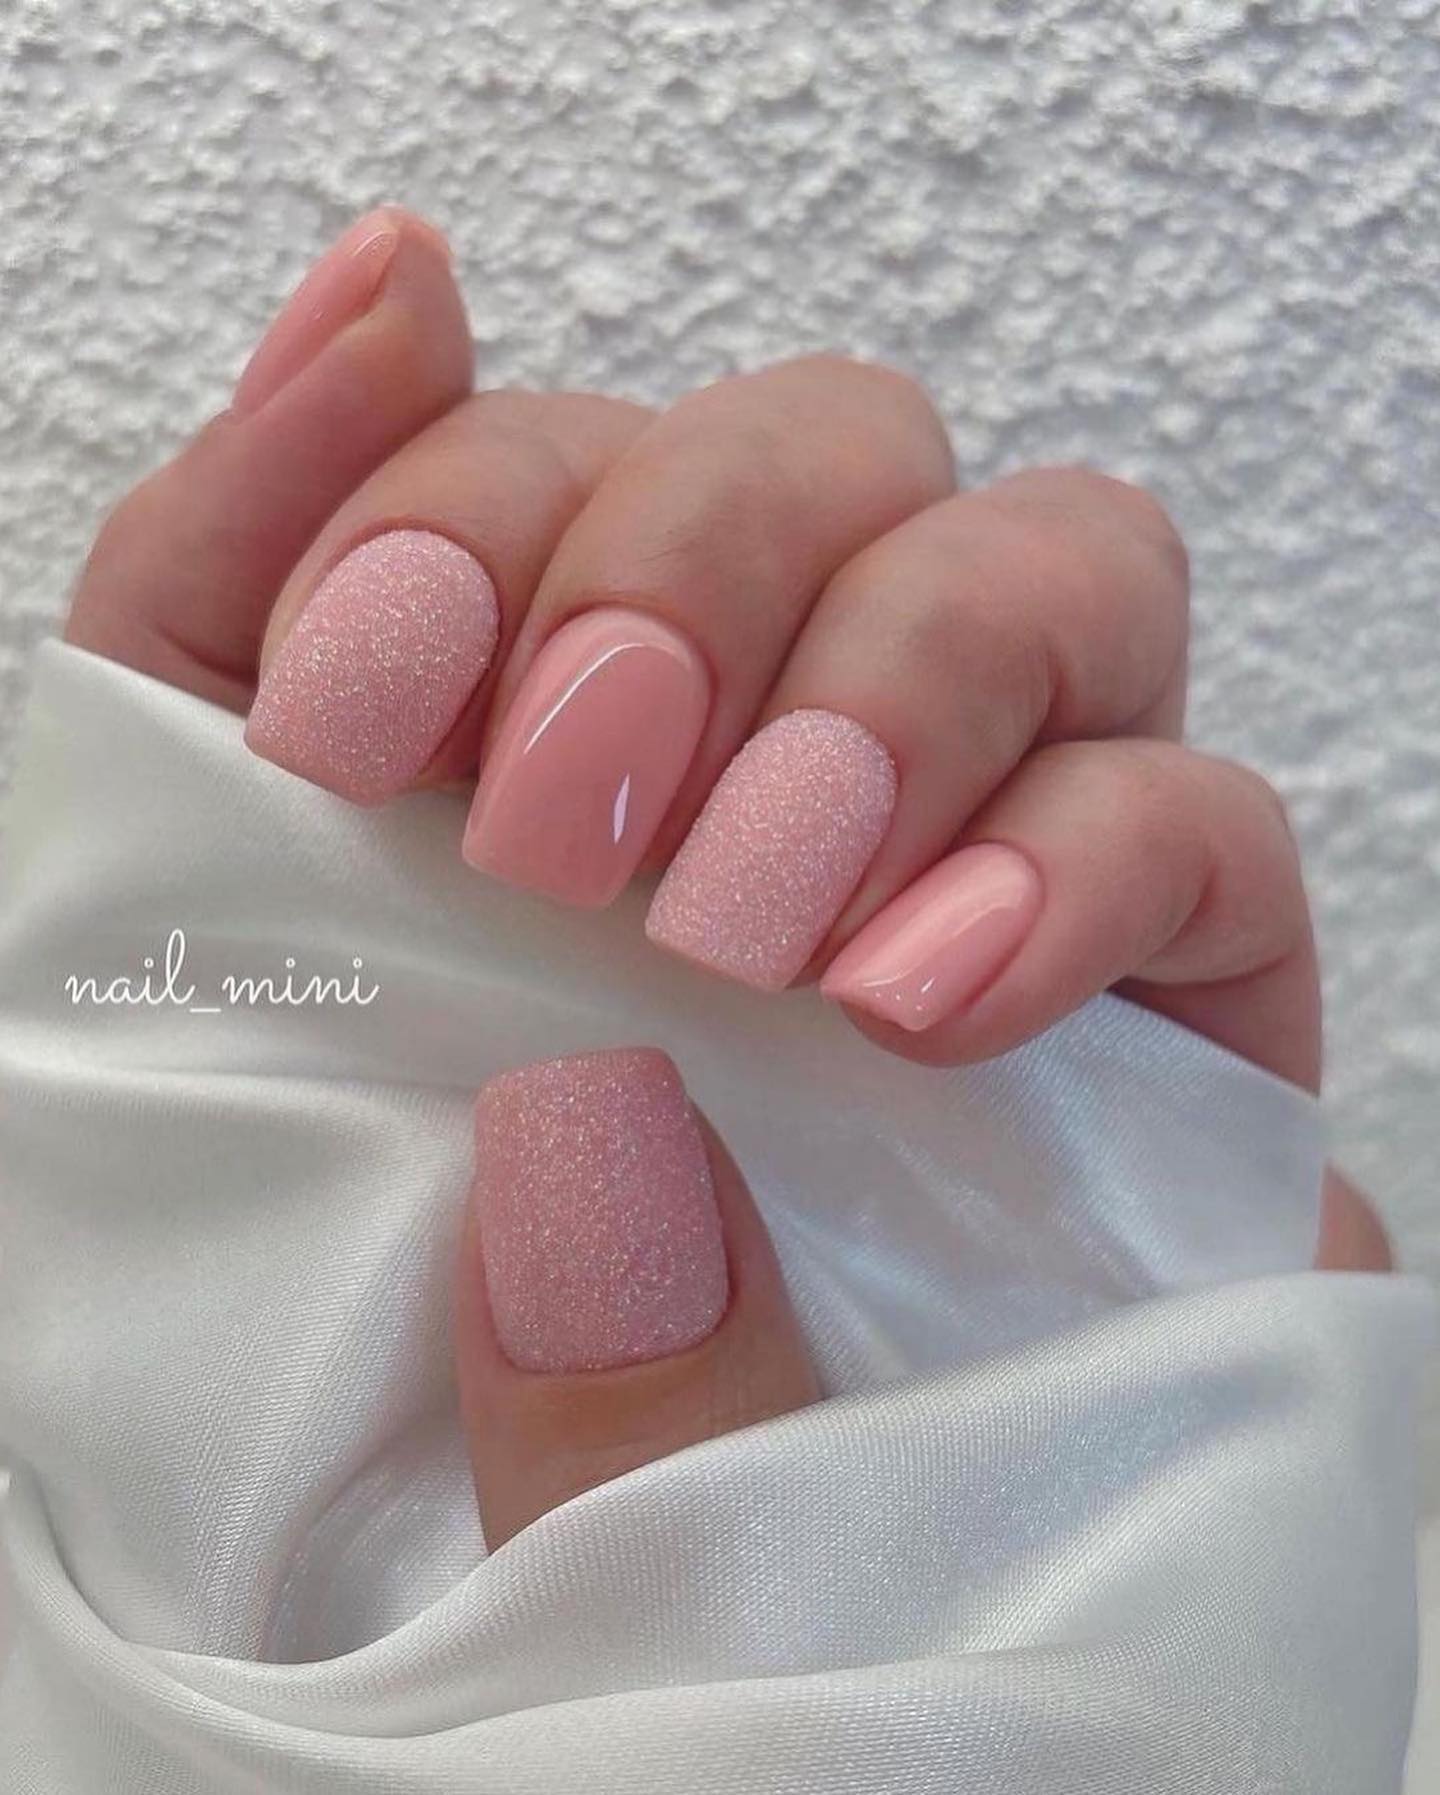 100 Of The Best Spring Inspired Nail Designs images 50